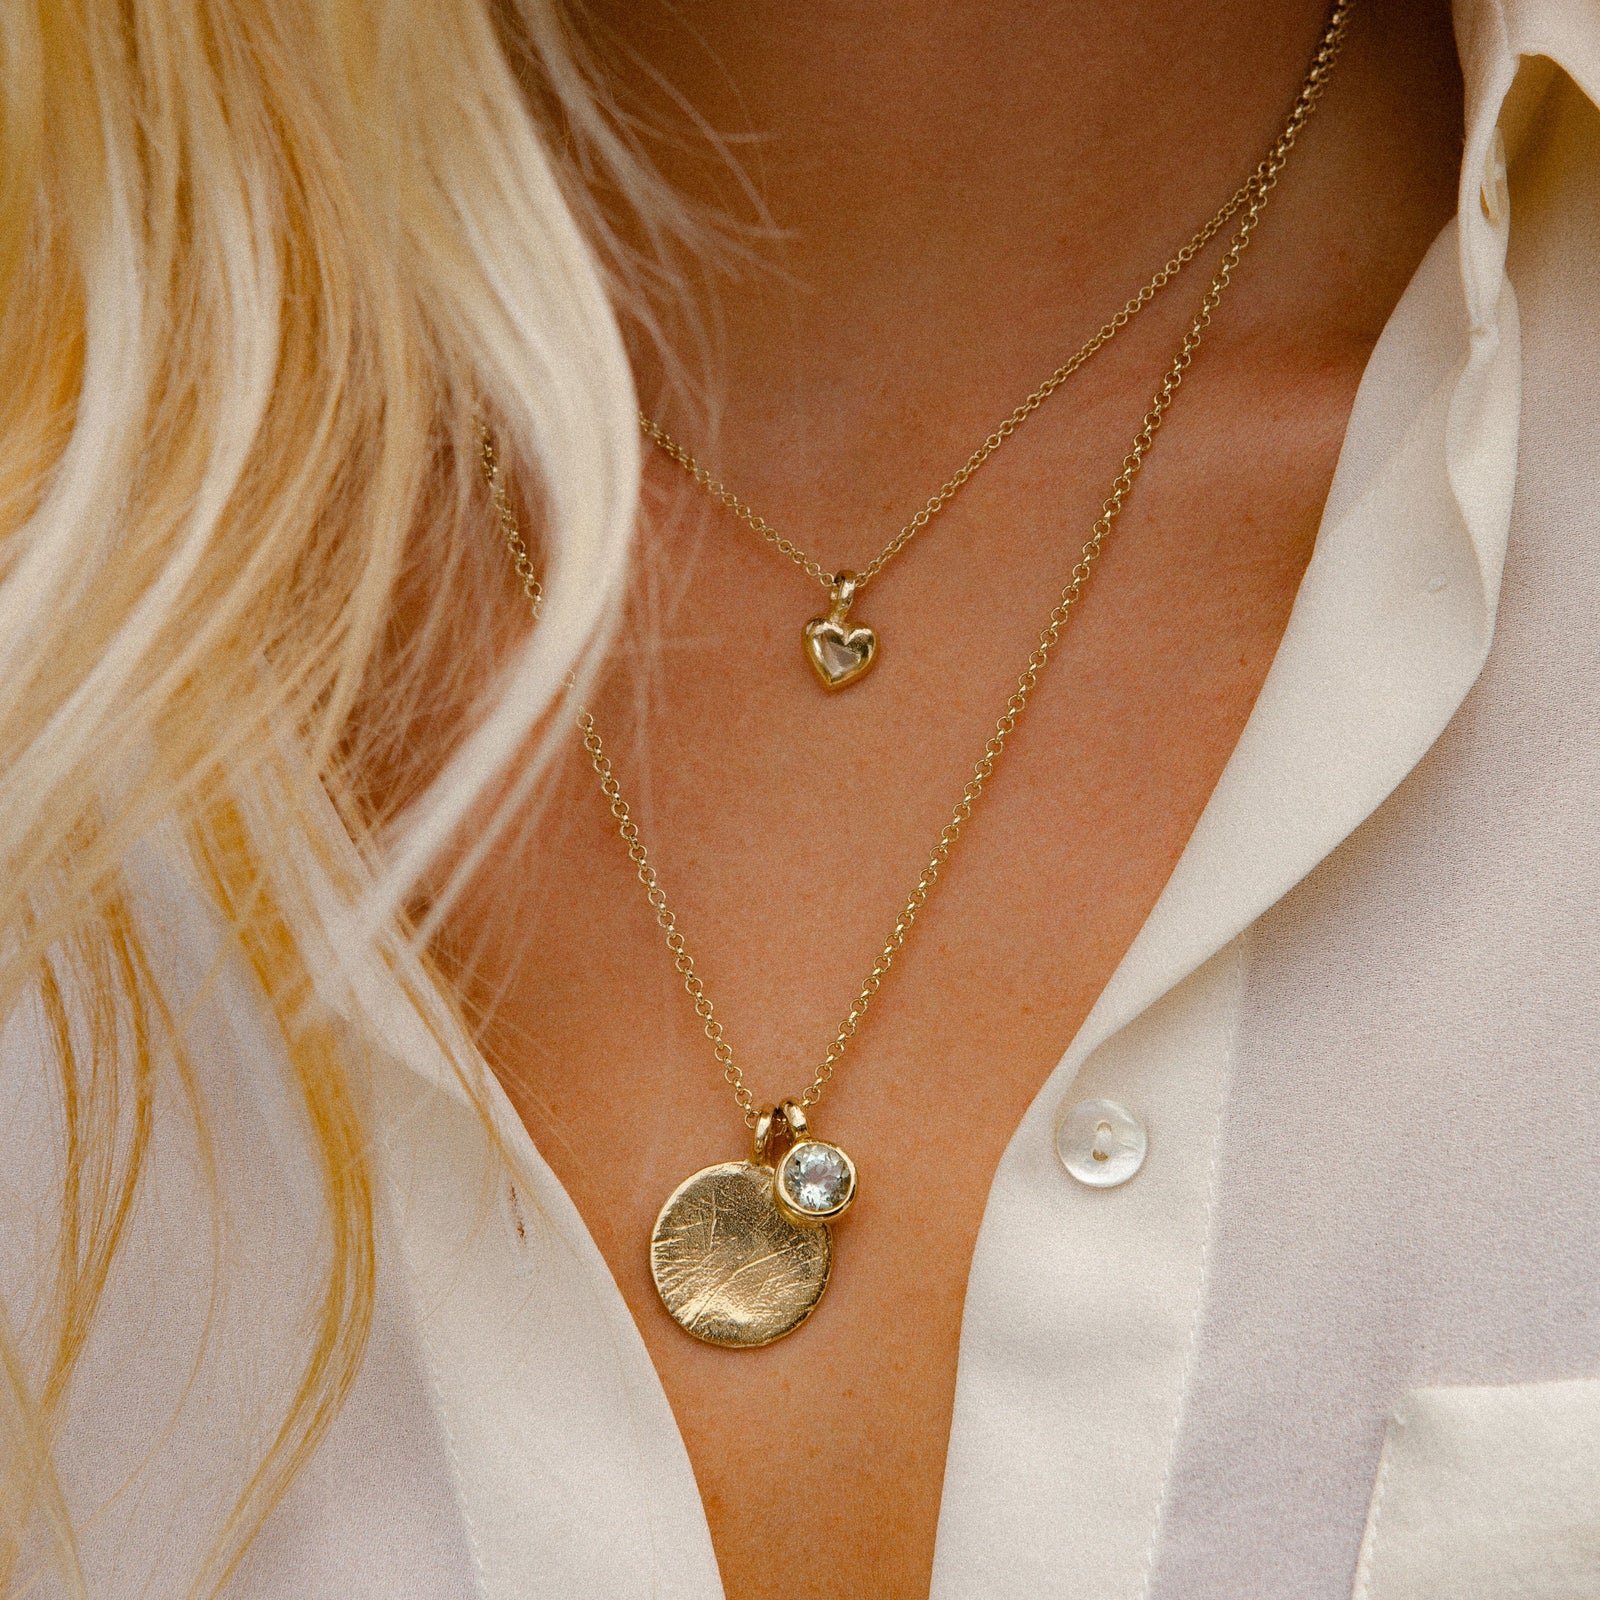 Gold Think of Me Heart Necklaces